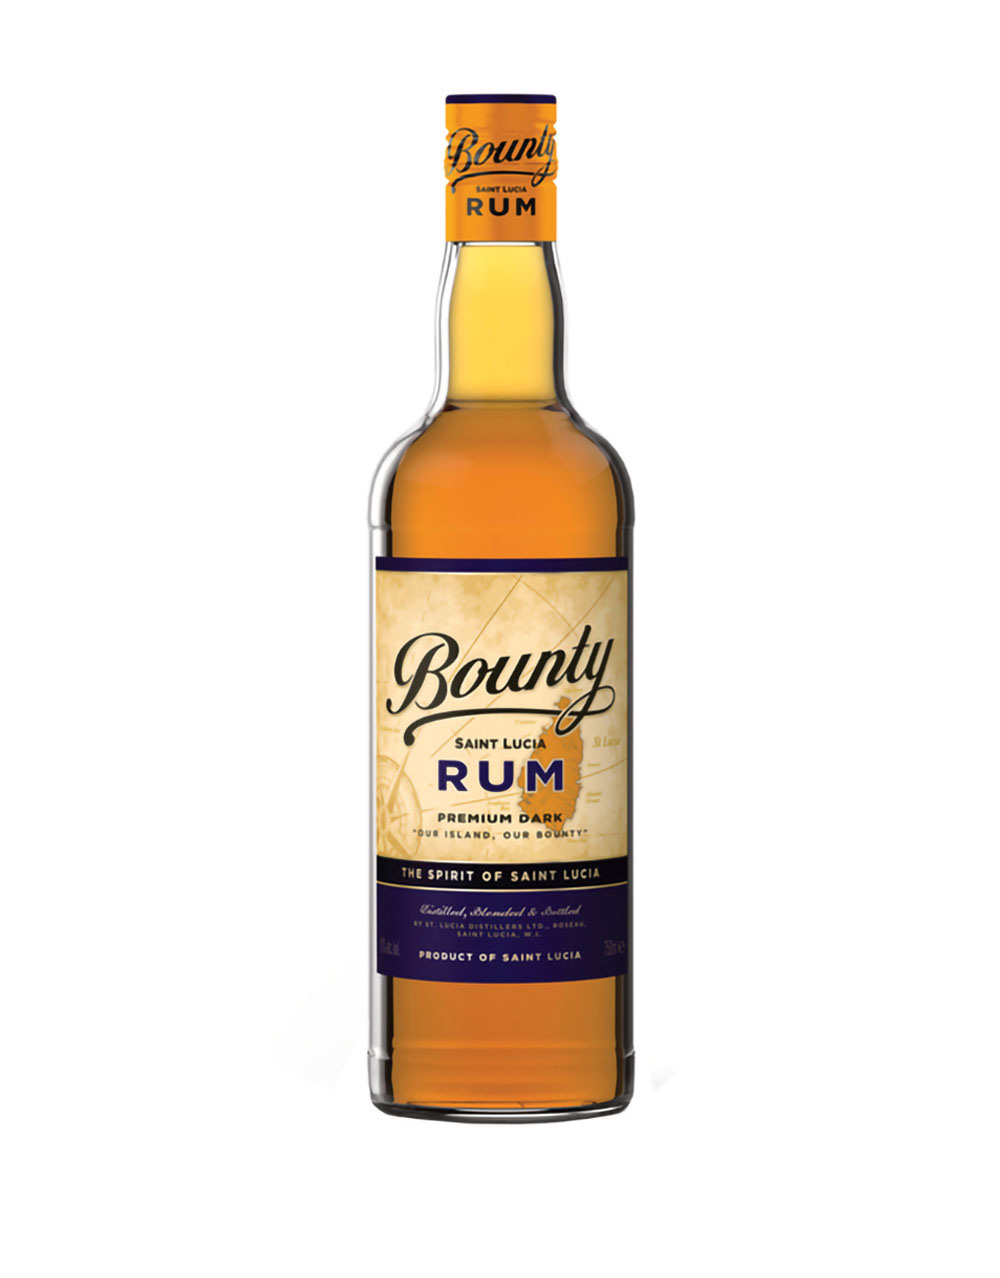 Mad River PX Rum